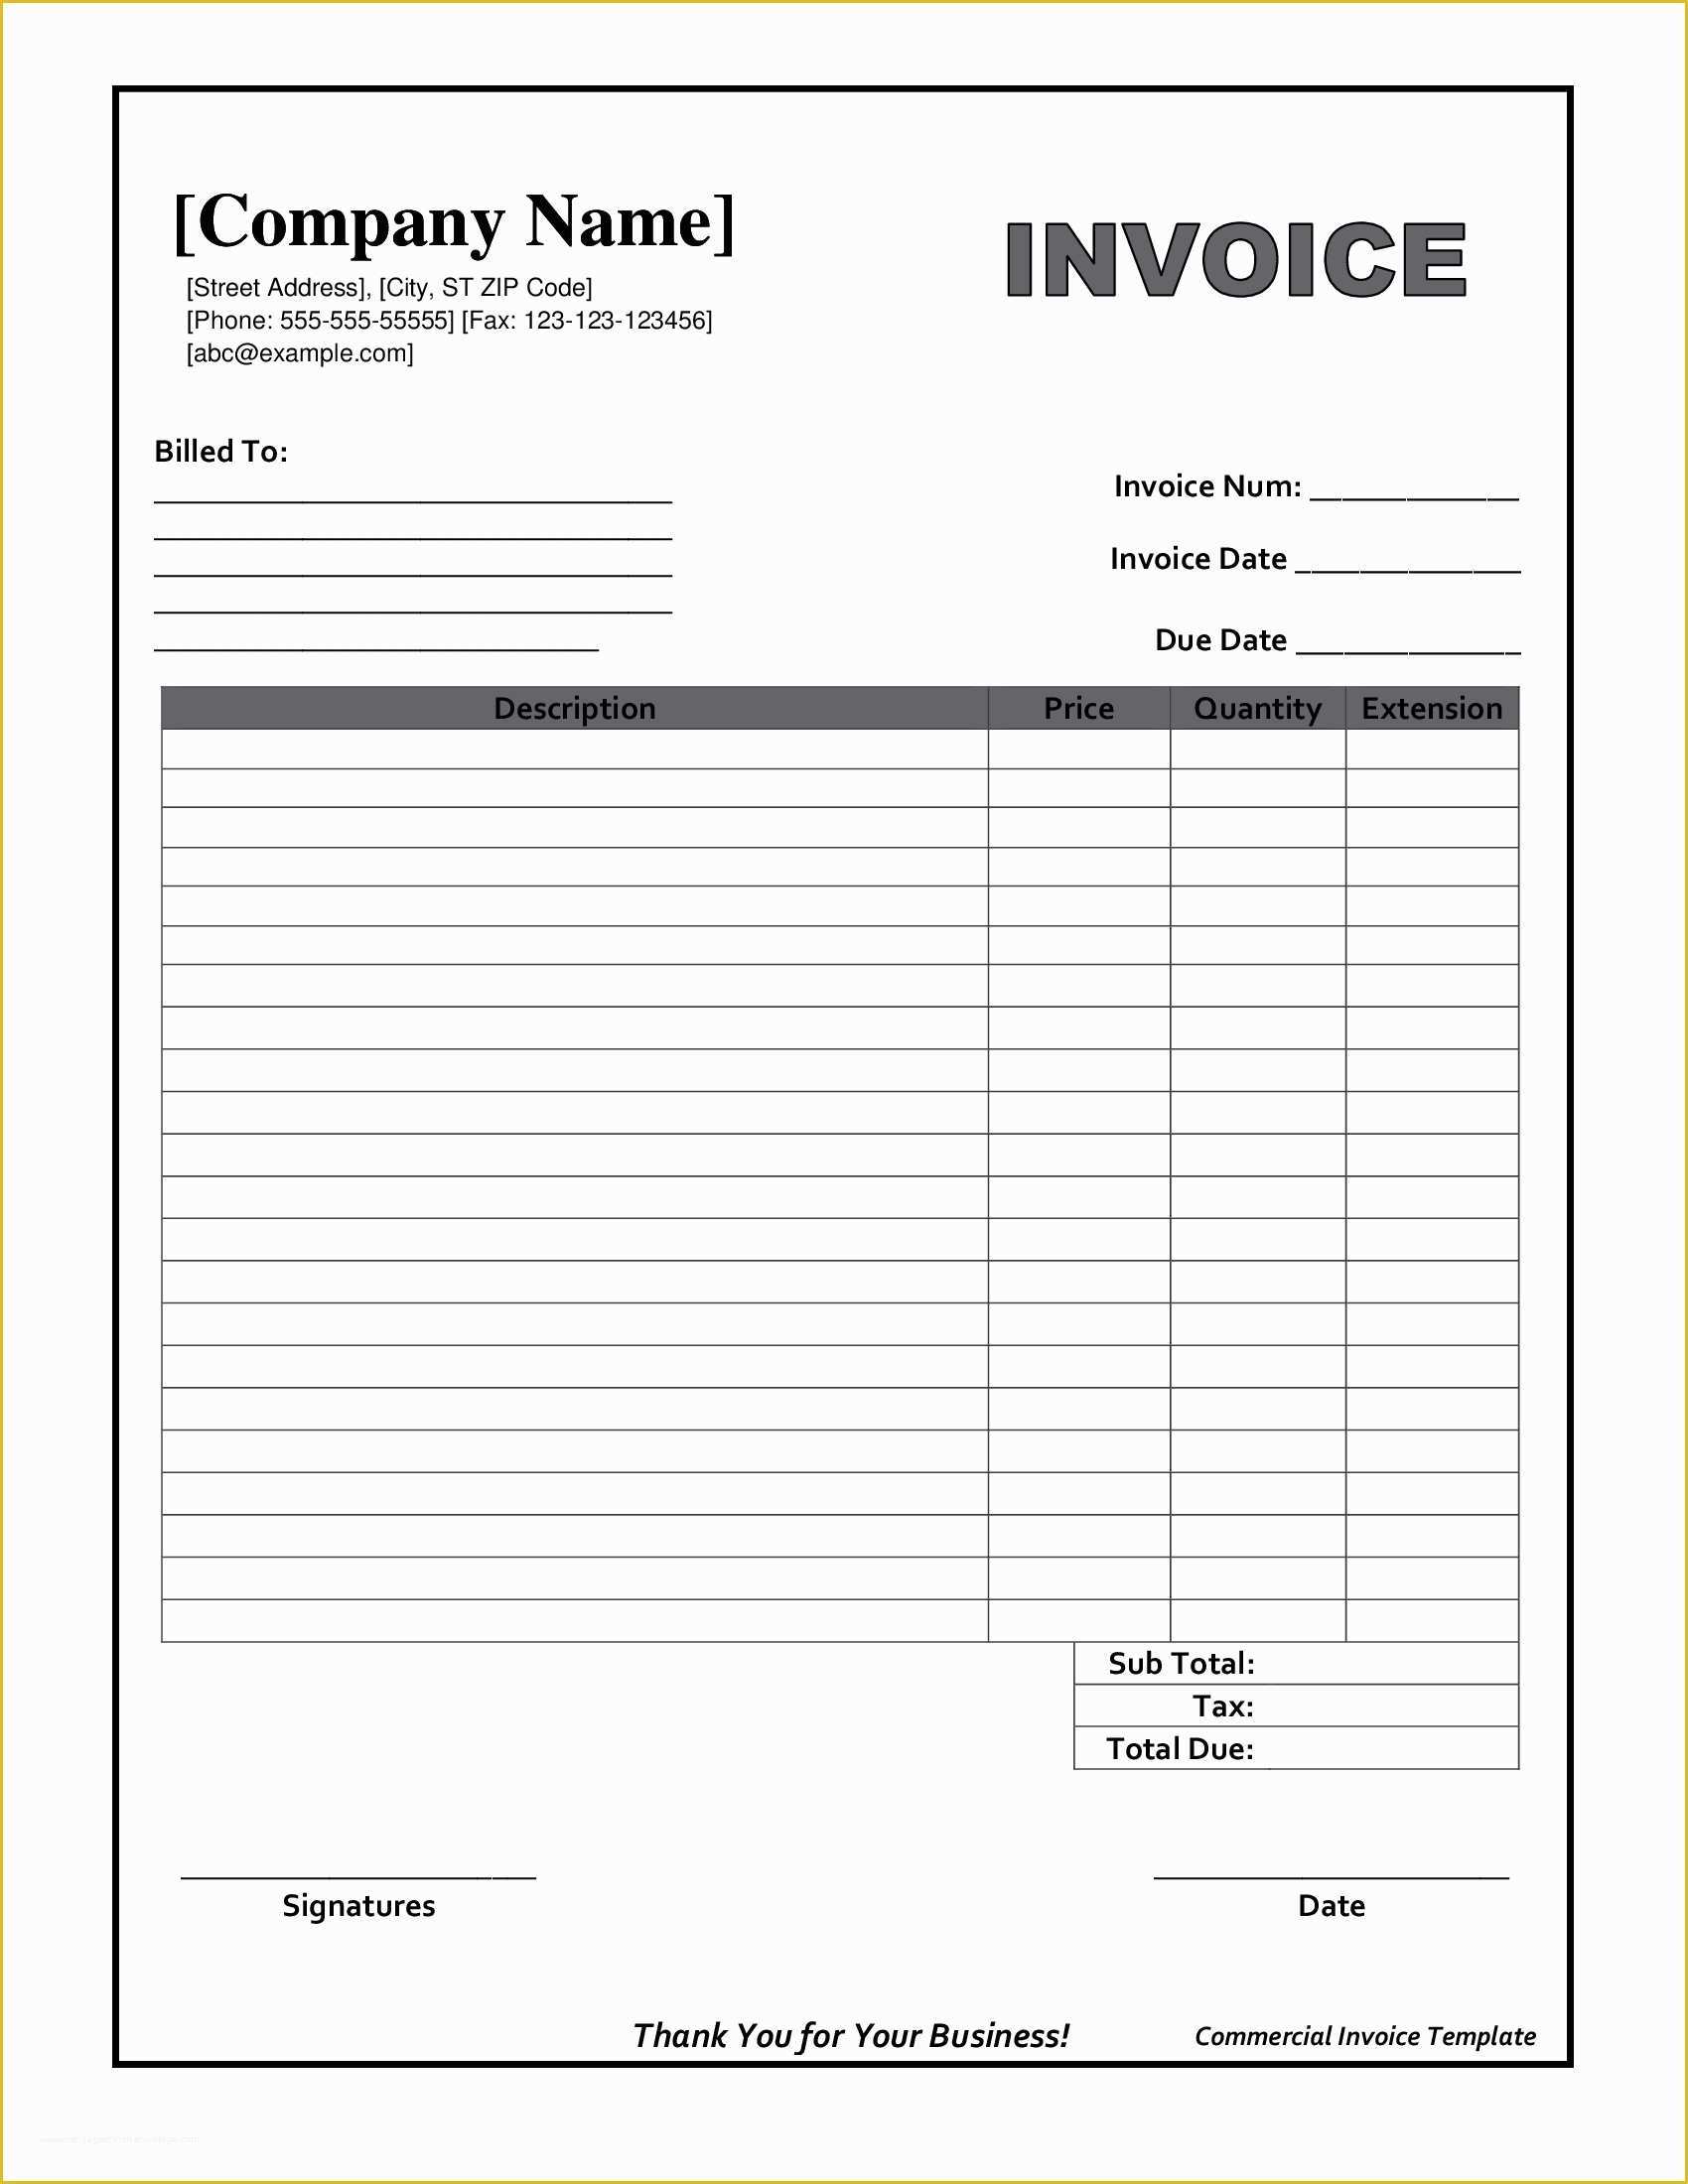 Free Personal Invoice Template Of Blank Invoice form Free